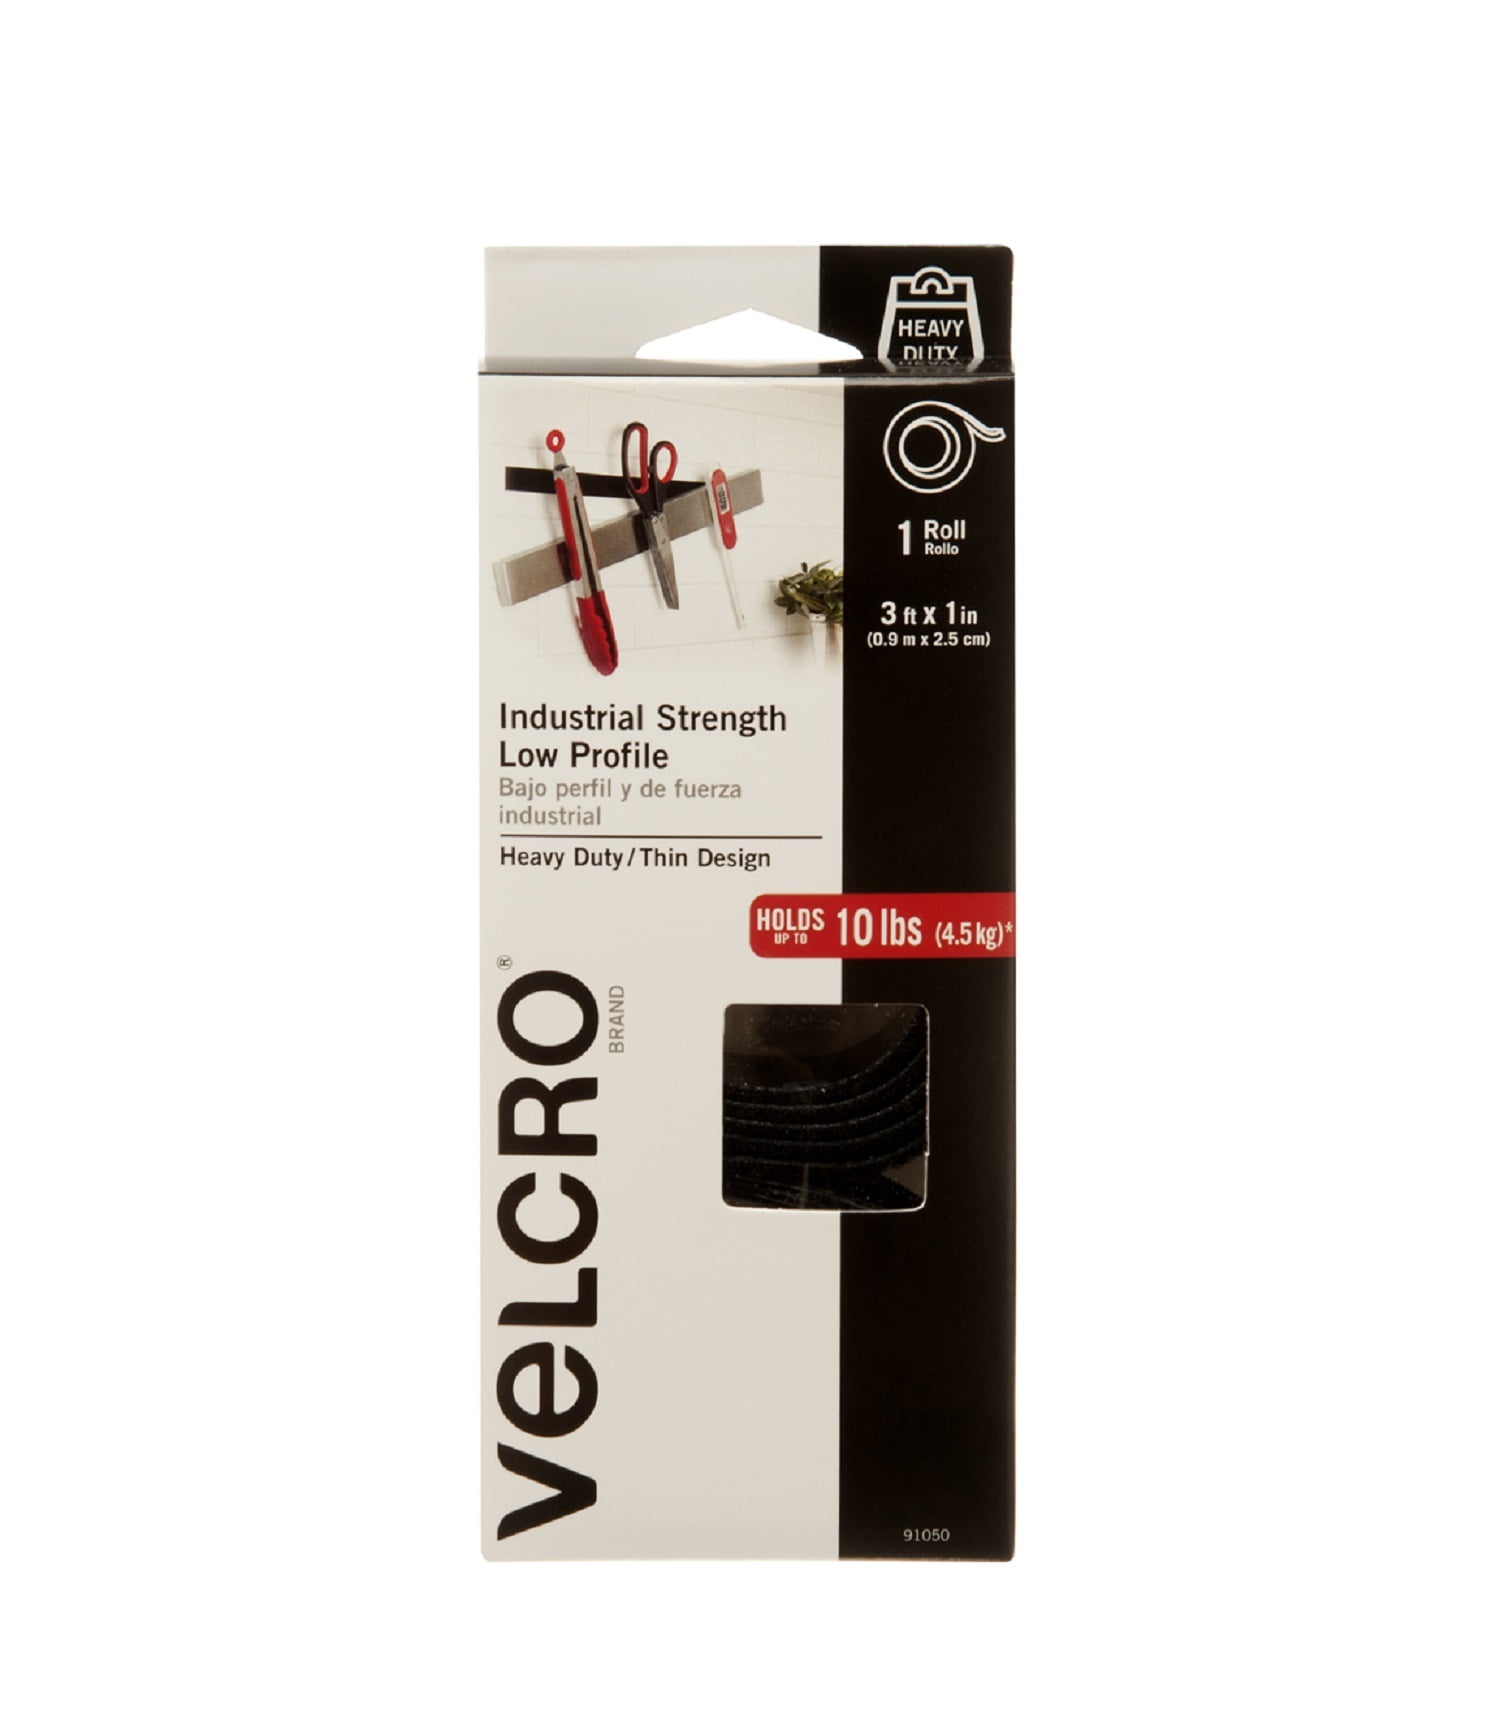 VELCRO Brand Industrial Strength - Low Profile | Superior Strength, 30% less Thickness than our Regular Industrial Strength Products | 3ft x 1in Roll. White